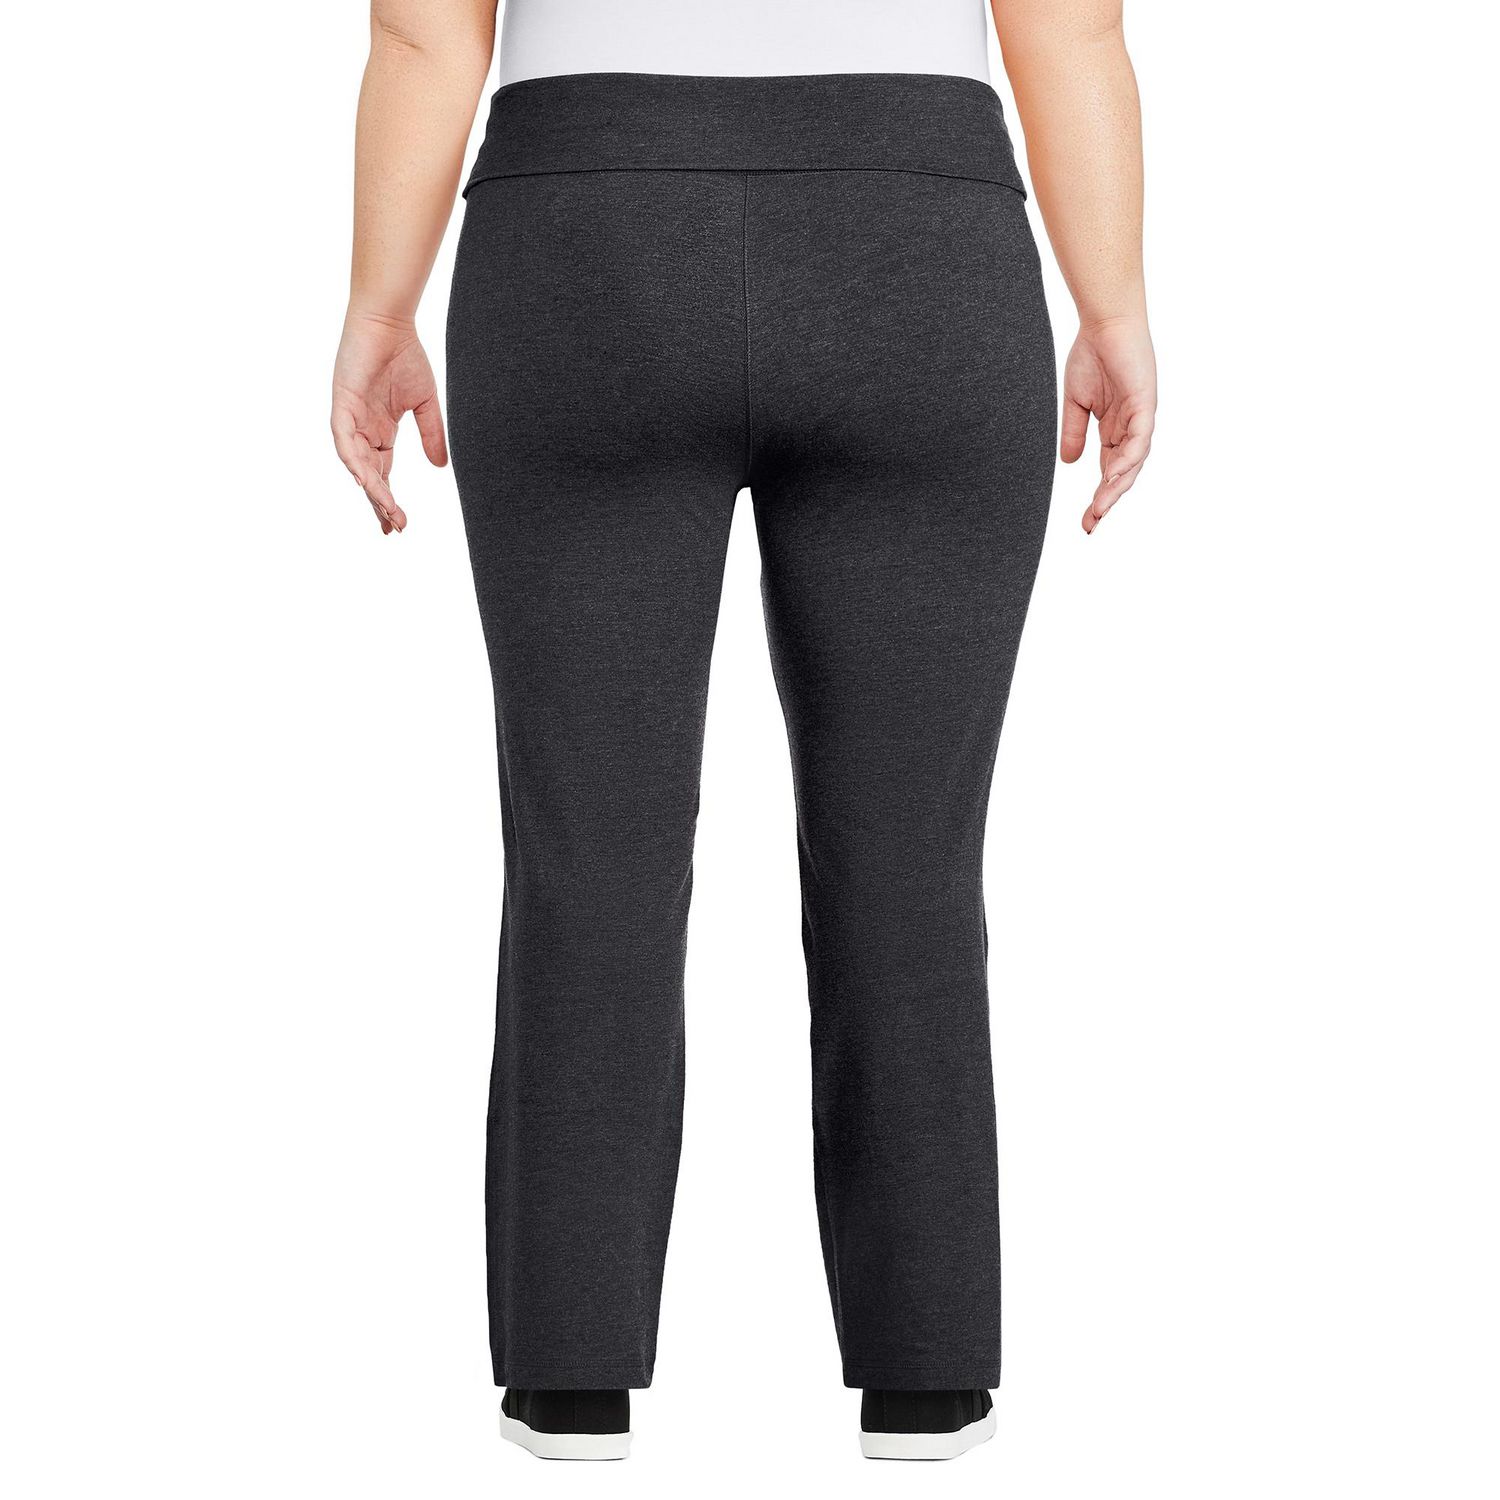 Bamboo Plus Size Legging 34 Length  The Art of Home